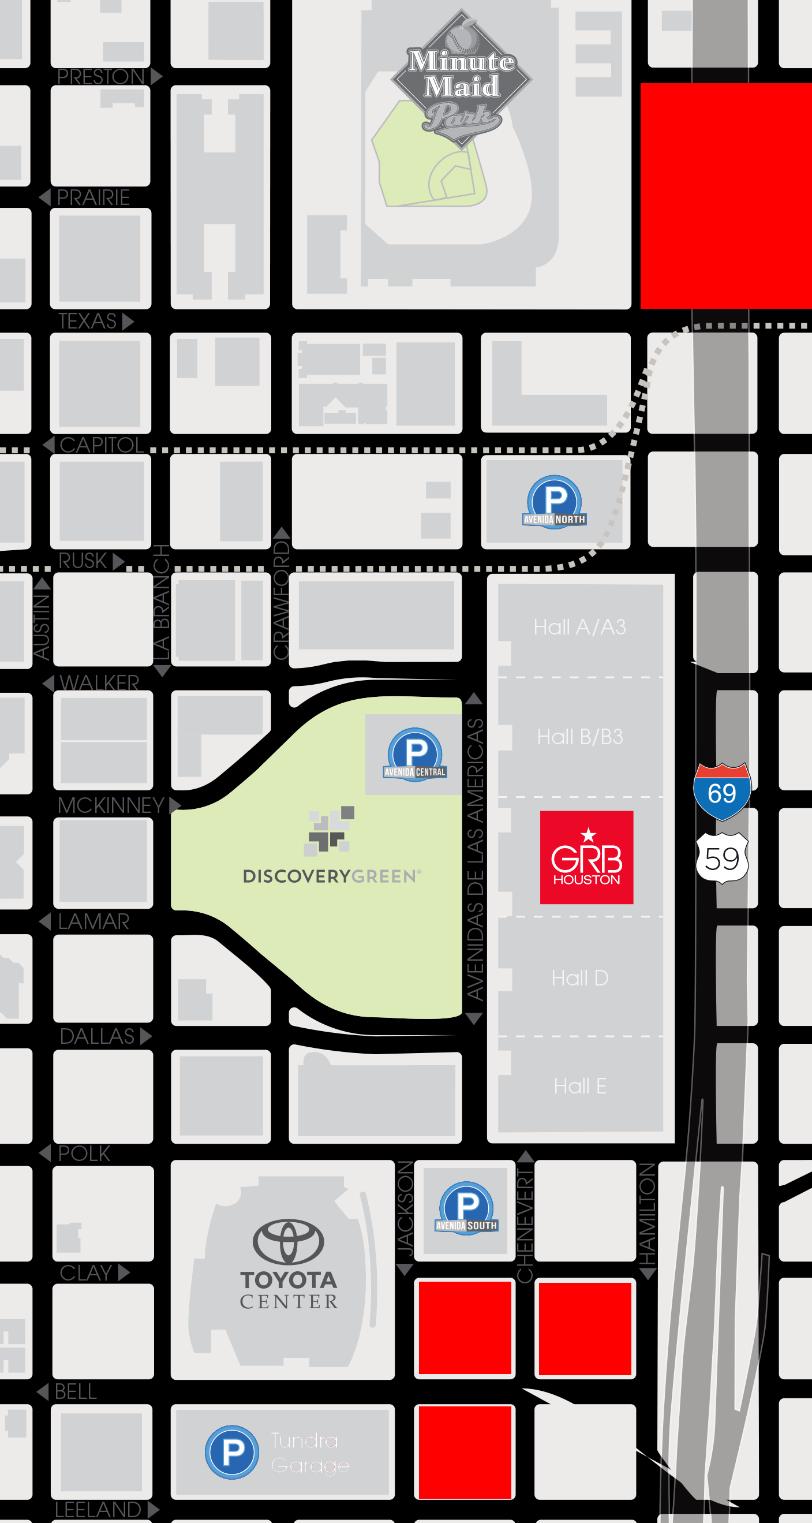 LAZ Lot Parking Map Free Surface Parking Lots LAZ Lot LAZ Lot GRB Free Surface Parking Overnight parking is not allowed and cars will be towed